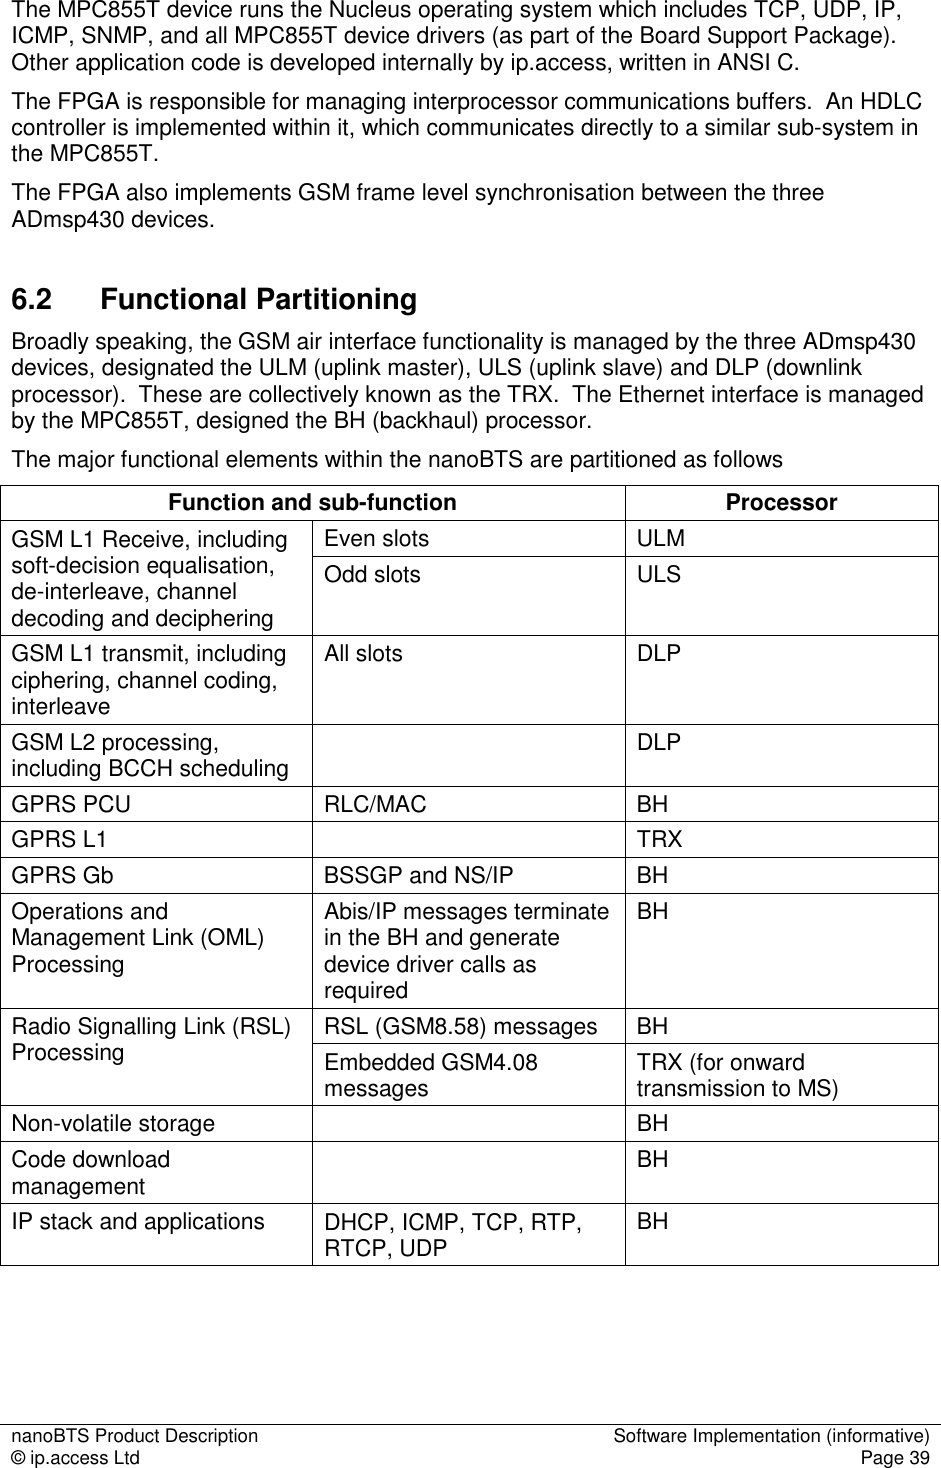 nanoBTS Product Description  Software Implementation (informative) © ip.access Ltd  Page 39  The MPC855T device runs the Nucleus operating system which includes TCP, UDP, IP, ICMP, SNMP, and all MPC855T device drivers (as part of the Board Support Package).   Other application code is developed internally by ip.access, written in ANSI C.   The FPGA is responsible for managing interprocessor communications buffers.  An HDLC controller is implemented within it, which communicates directly to a similar sub-system in the MPC855T. The FPGA also implements GSM frame level synchronisation between the three ADmsp430 devices. 6.2  Functional Partitioning Broadly speaking, the GSM air interface functionality is managed by the three ADmsp430 devices, designated the ULM (uplink master), ULS (uplink slave) and DLP (downlink processor).  These are collectively known as the TRX.  The Ethernet interface is managed by the MPC855T, designed the BH (backhaul) processor. The major functional elements within the nanoBTS are partitioned as follows Function and sub-function  Processor  Even slots  ULM GSM L1 Receive, including soft-decision equalisation, de-interleave, channel decoding and deciphering Odd slots  ULS GSM L1 transmit, including ciphering, channel coding, interleave All slots  DLP GSM L2 processing, including BCCH scheduling    DLP GPRS PCU   RLC/MAC  BH GPRS L1    TRX GPRS Gb  BSSGP and NS/IP  BH Operations and Management Link (OML) Processing Abis/IP messages terminate in the BH and generate device driver calls as required BH RSL (GSM8.58) messages  BH Radio Signalling Link (RSL) Processing  Embedded GSM4.08 messages  TRX (for onward transmission to MS) Non-volatile storage    BH Code download management    BH IP stack and applications  DHCP, ICMP, TCP, RTP, RTCP, UDP  BH  